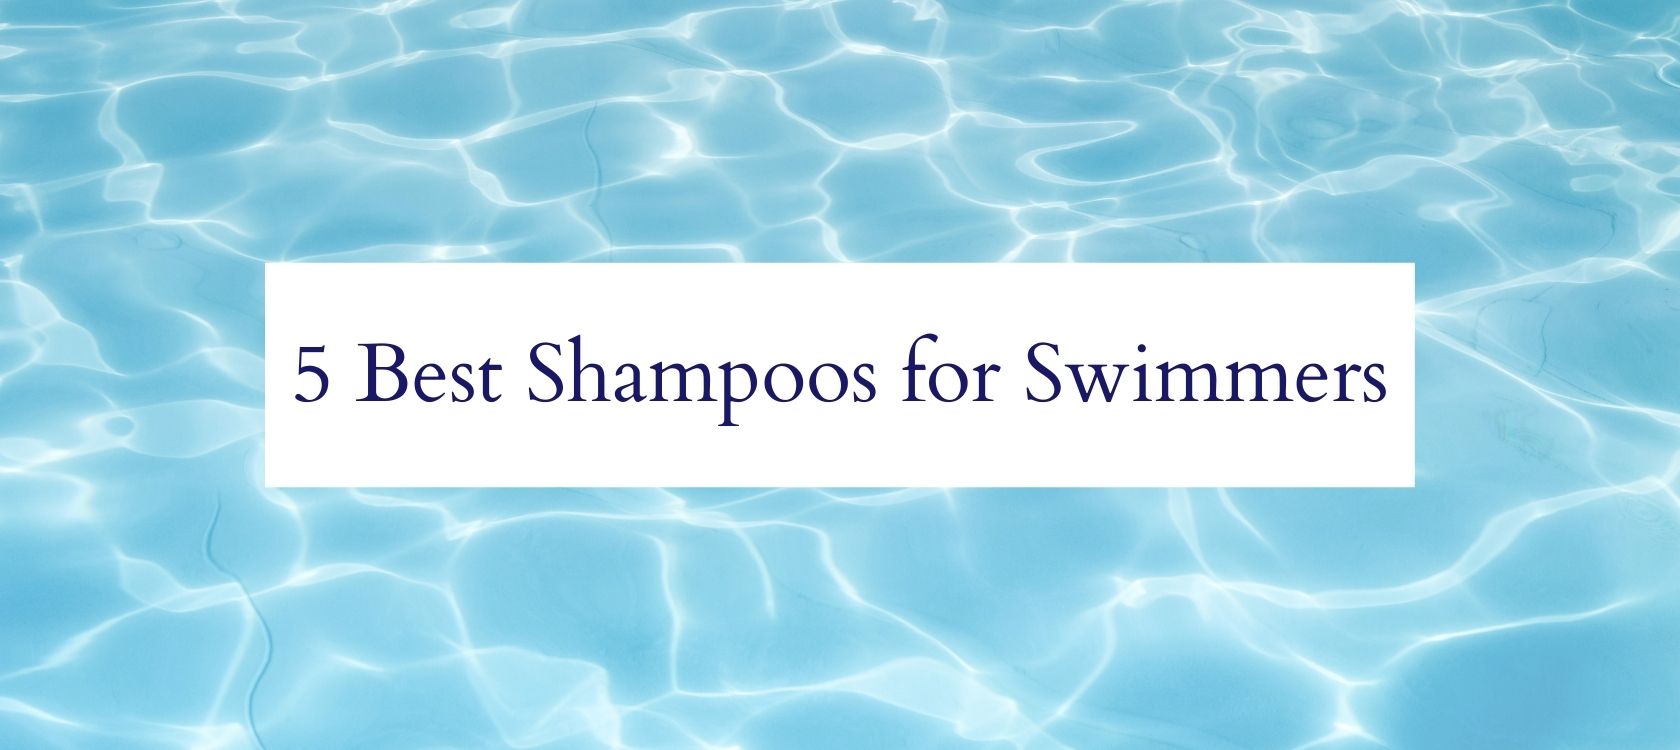 5 Best Shampoos for Swimmers